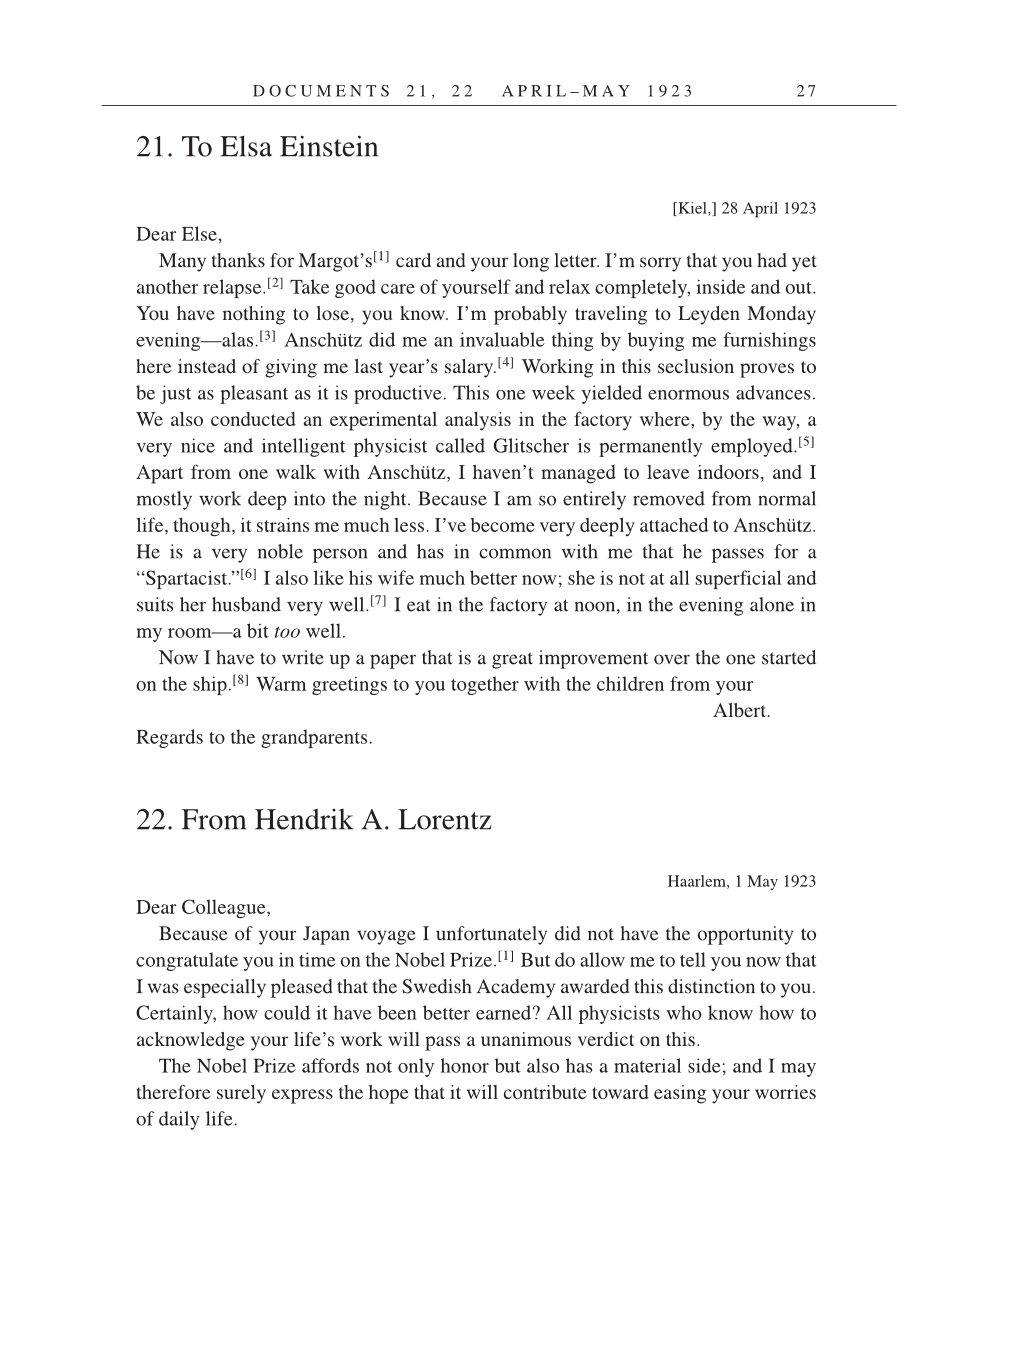 Volume 14: The Berlin Years: Writings & Correspondence, April 1923-May 1925 (English Translation Supplement) page 27